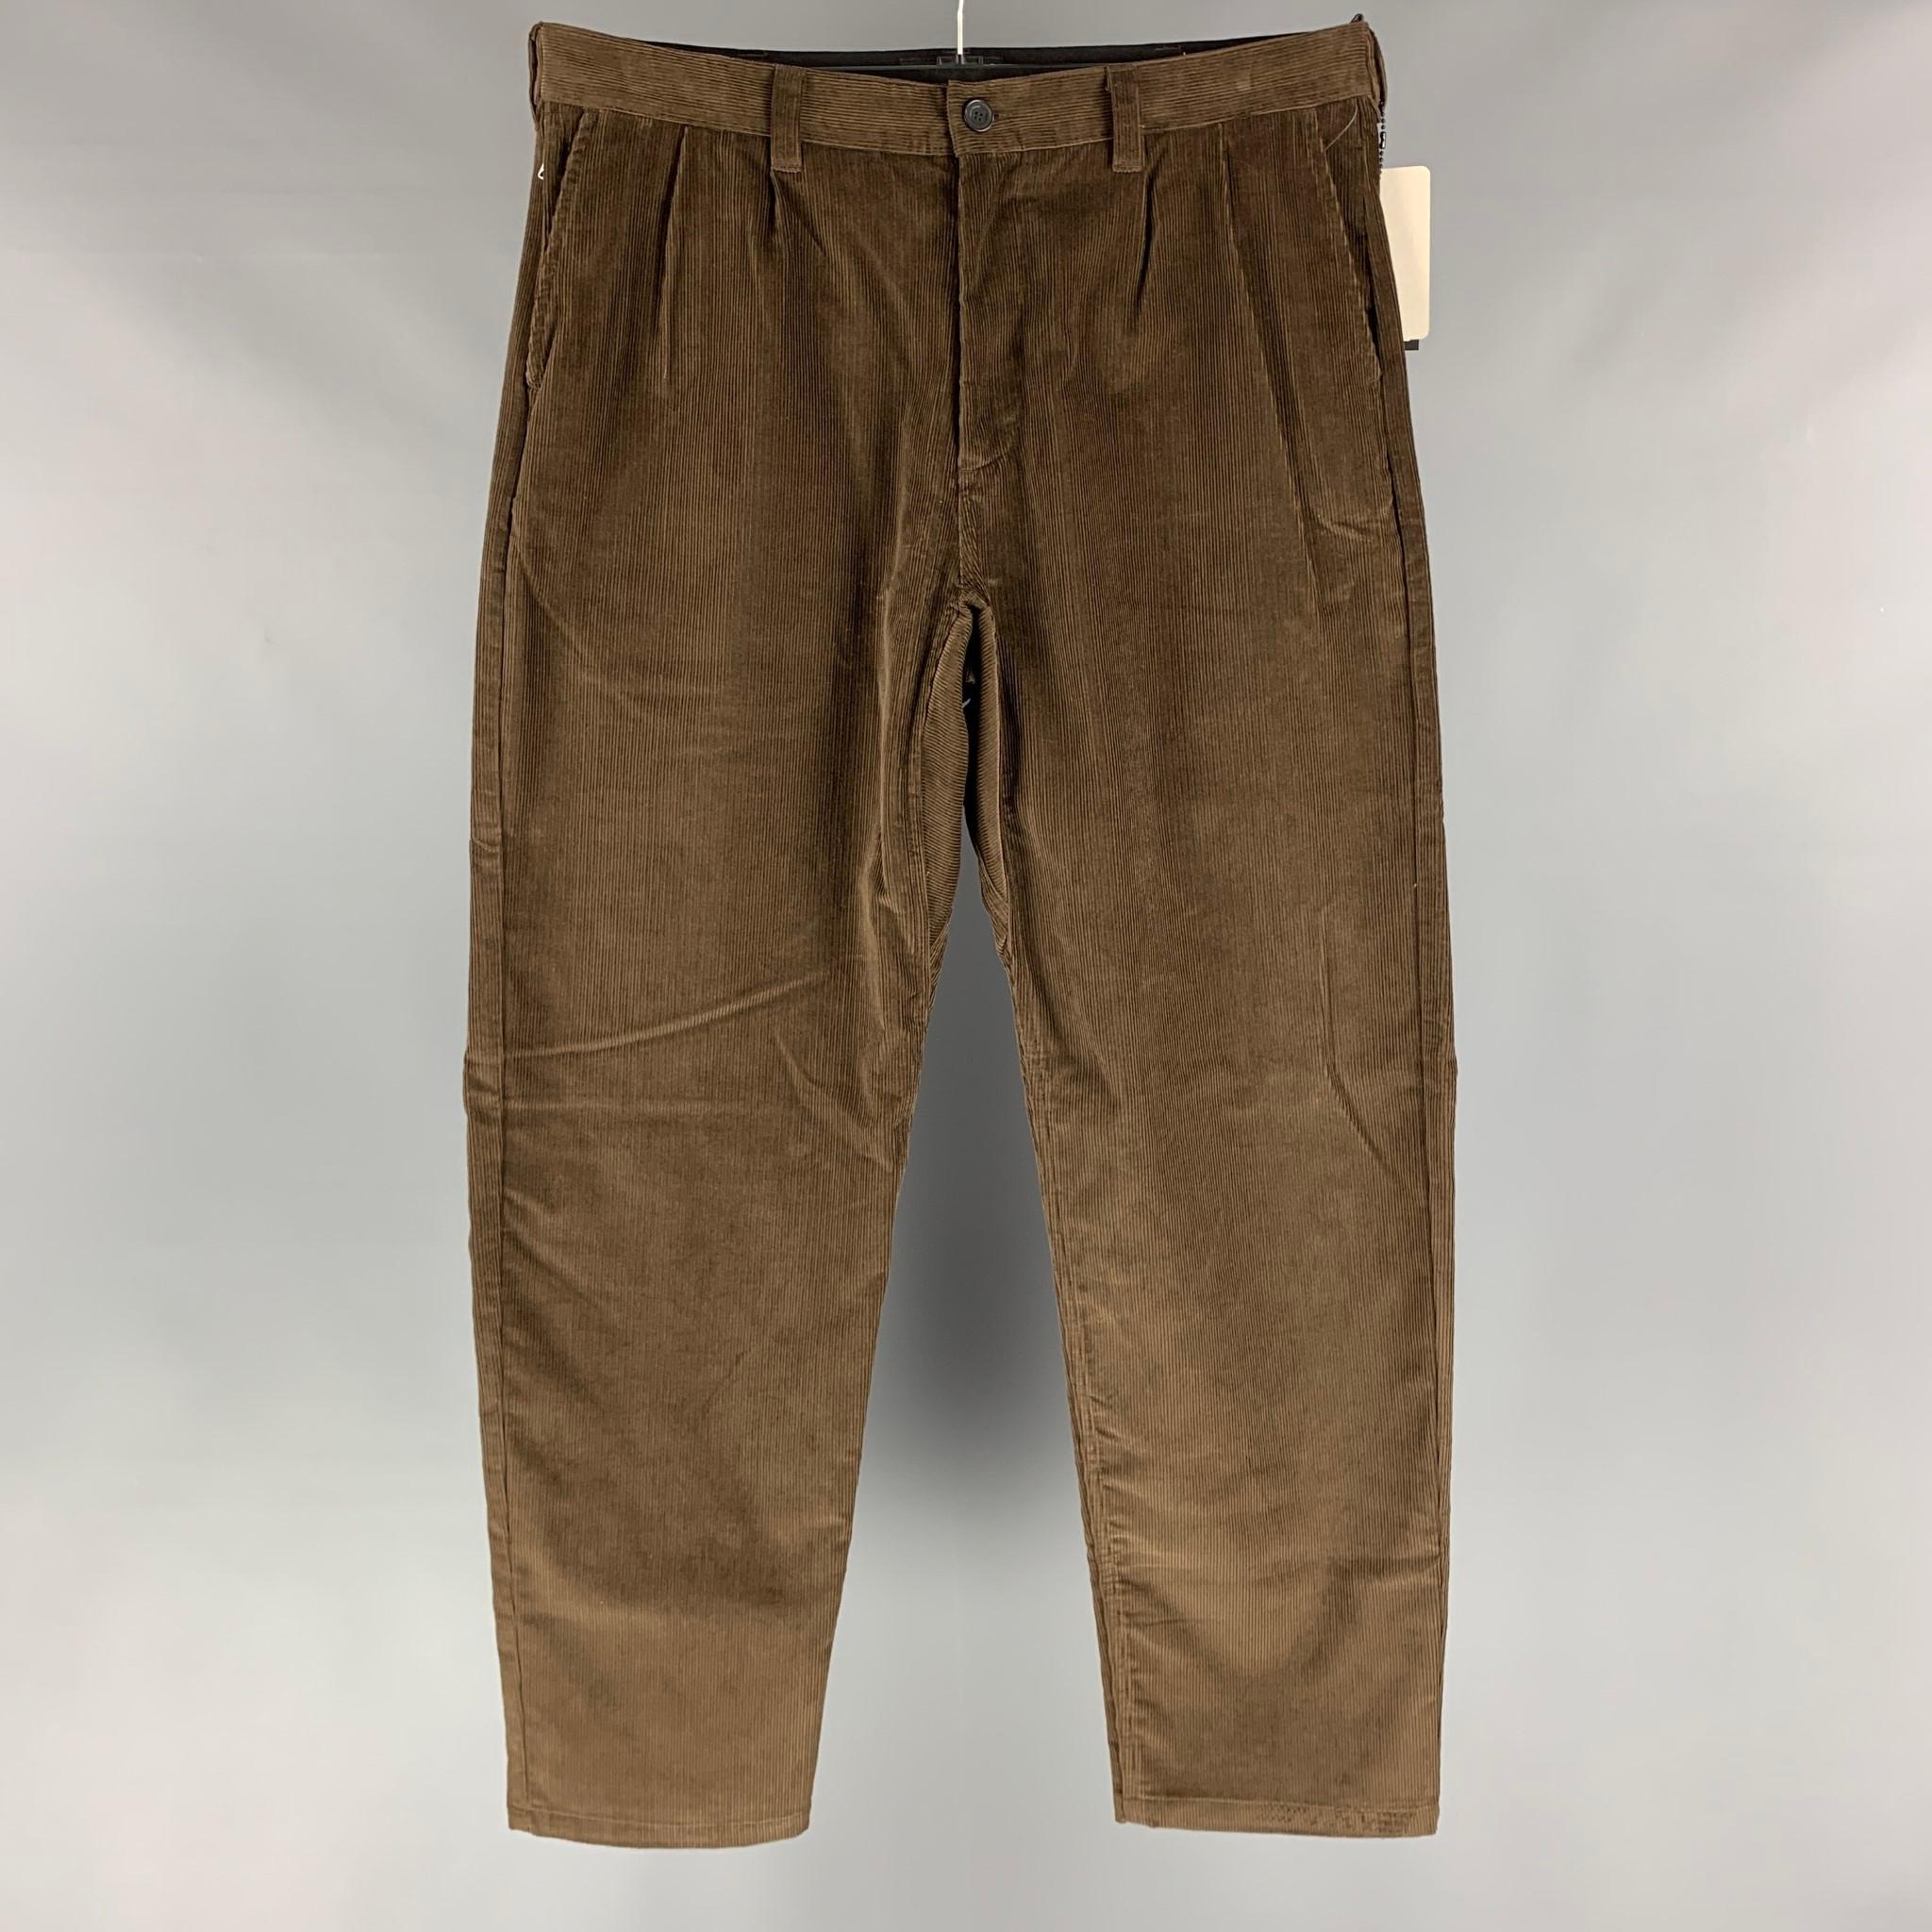 HAVEN 'Shop Pants' casual pants comes in a brown cotton corduroy fabric featuring an pleated style, a zip up pocket, snap button detail at waistband and a button fly closure. Made in Canada.

New With Tags.
Marked: L

Measurements:

Waist: 37